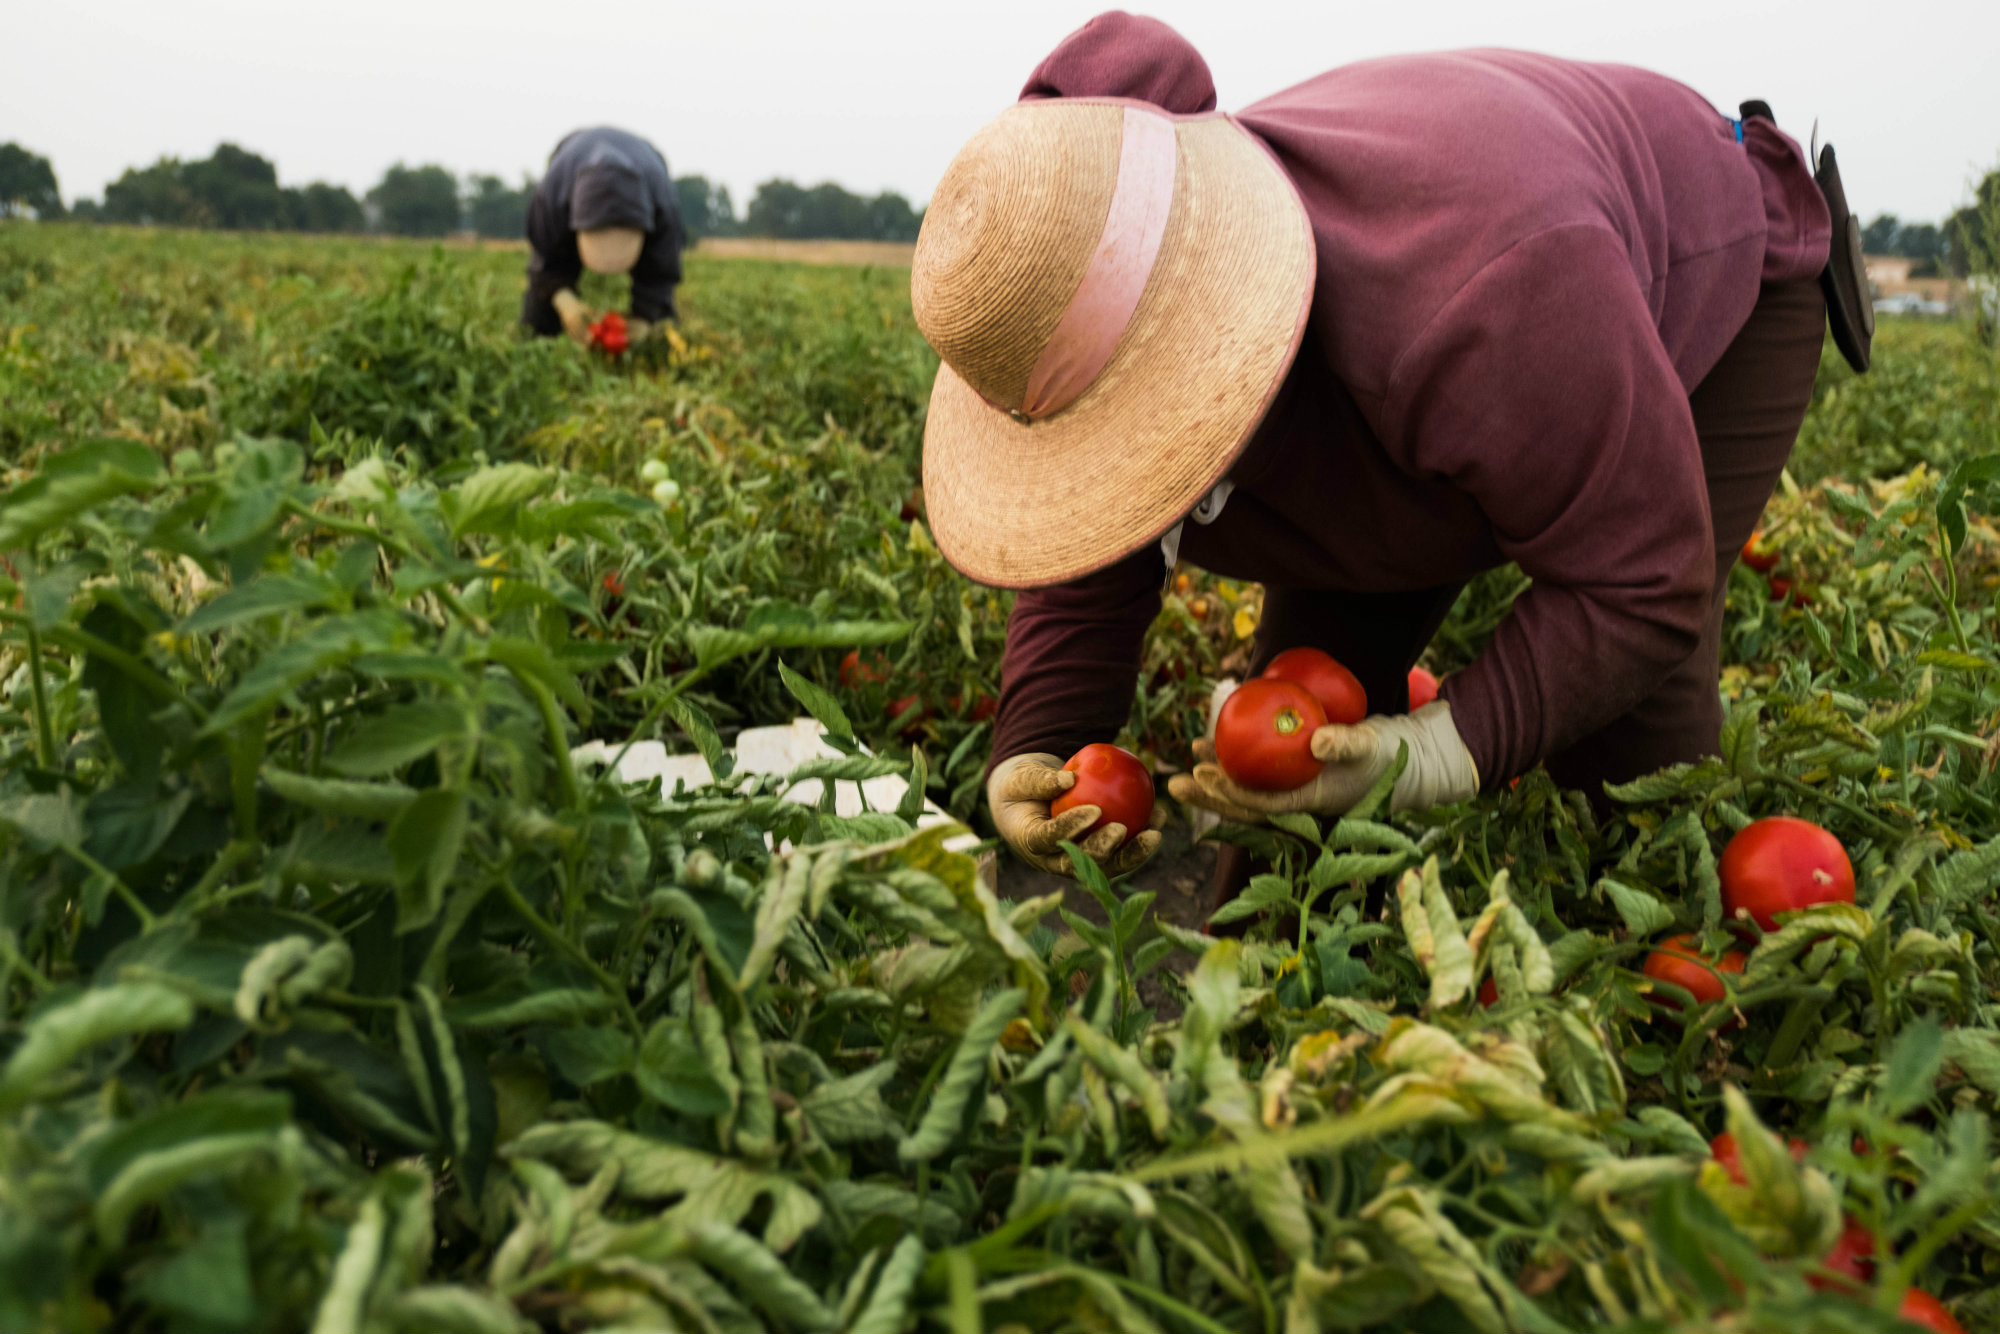 Workers pick tomatoes at Ray Yeung farm.